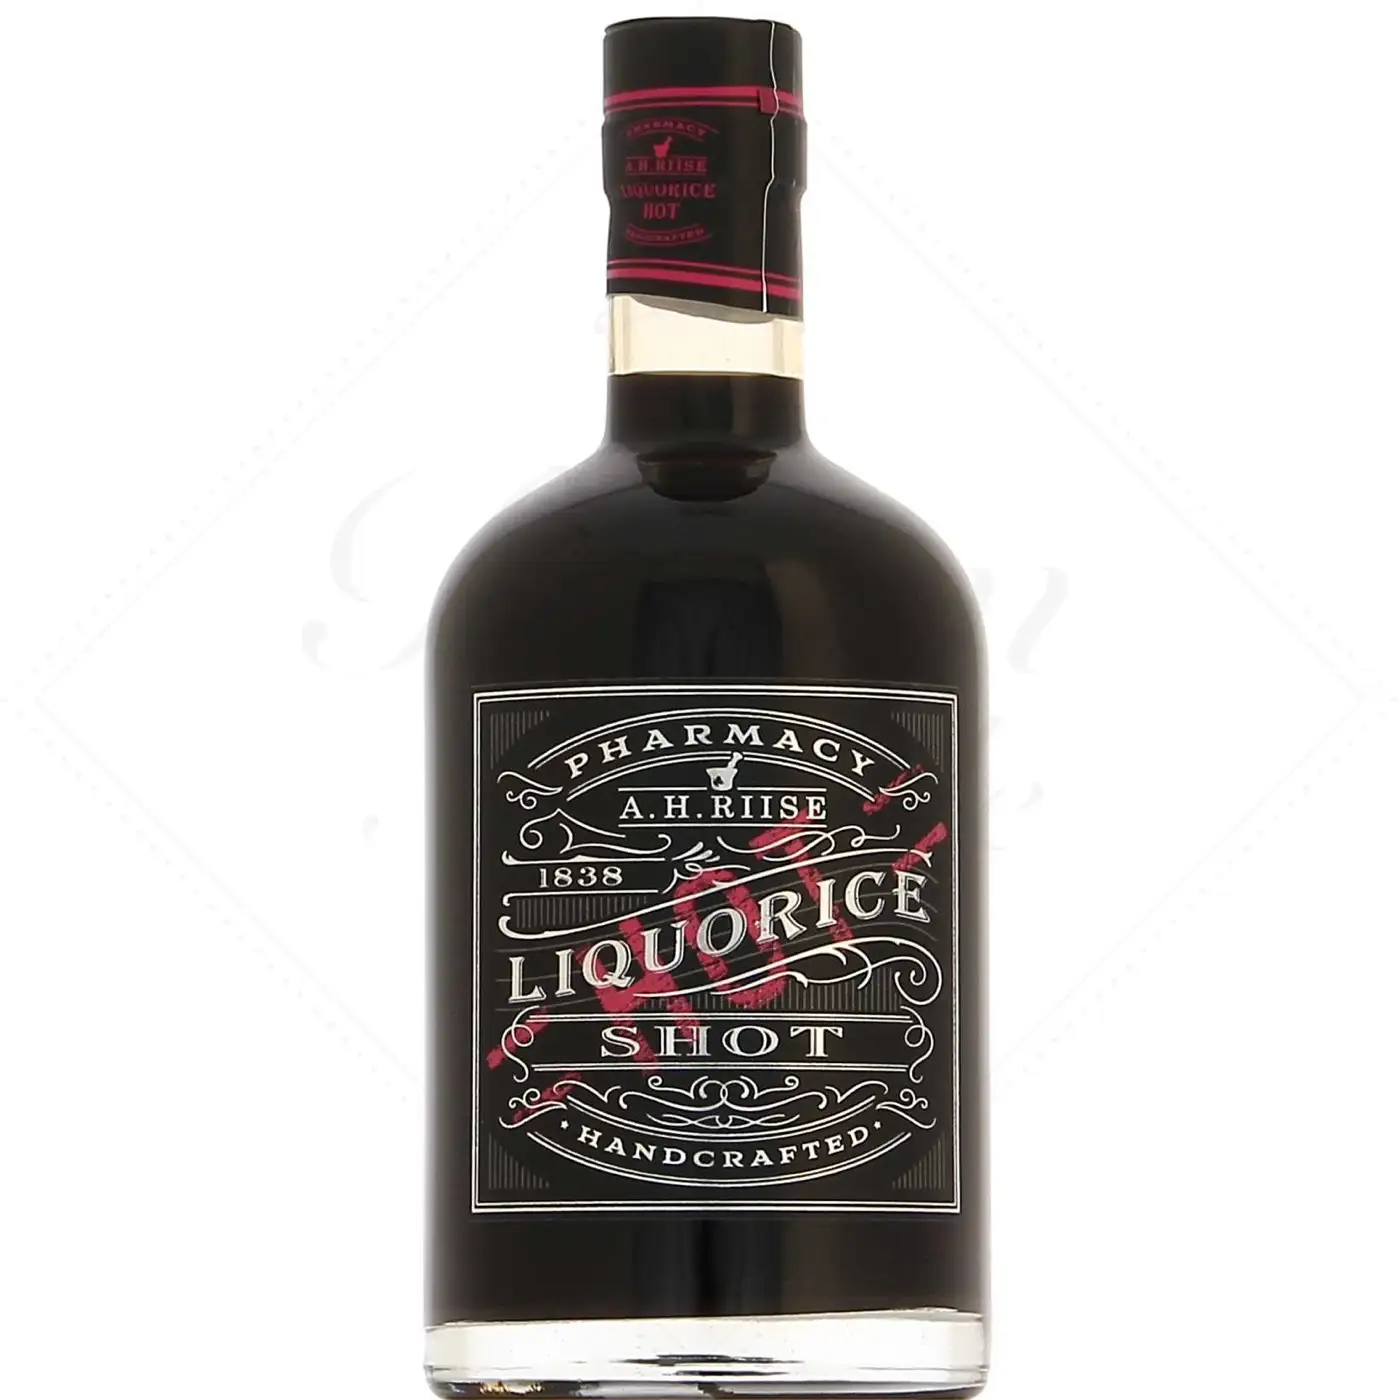 Image of the front of the bottle of the rum Pharmacy Liquorice